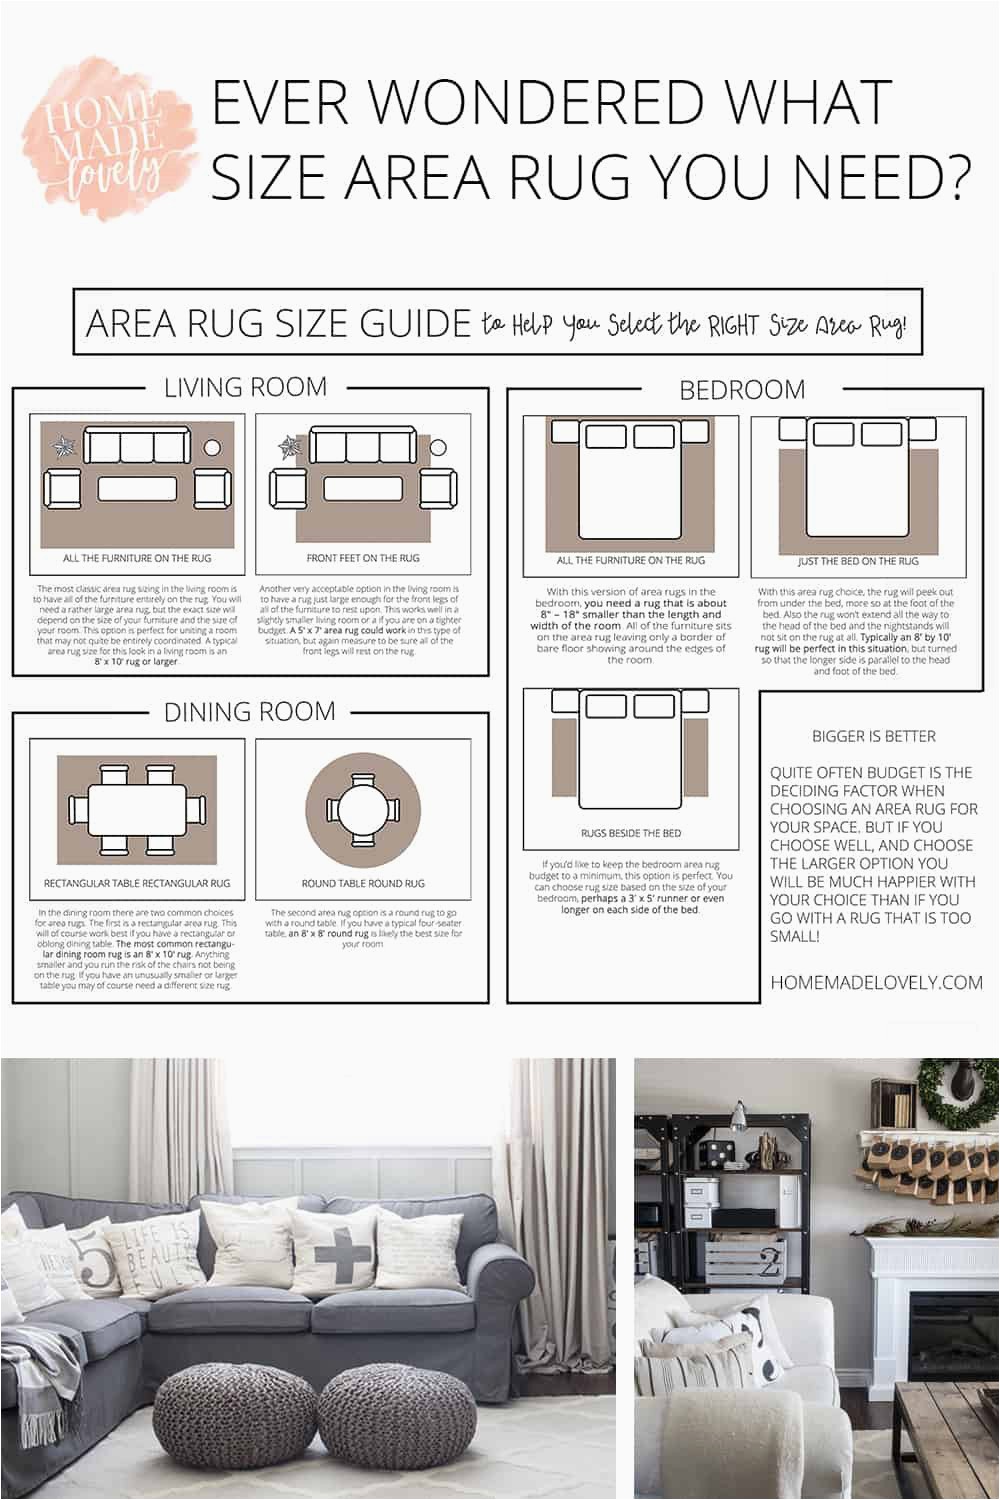 Standard Large area Rug Sizes area Rug Size Guide to Help You Select the Right Size area Rug